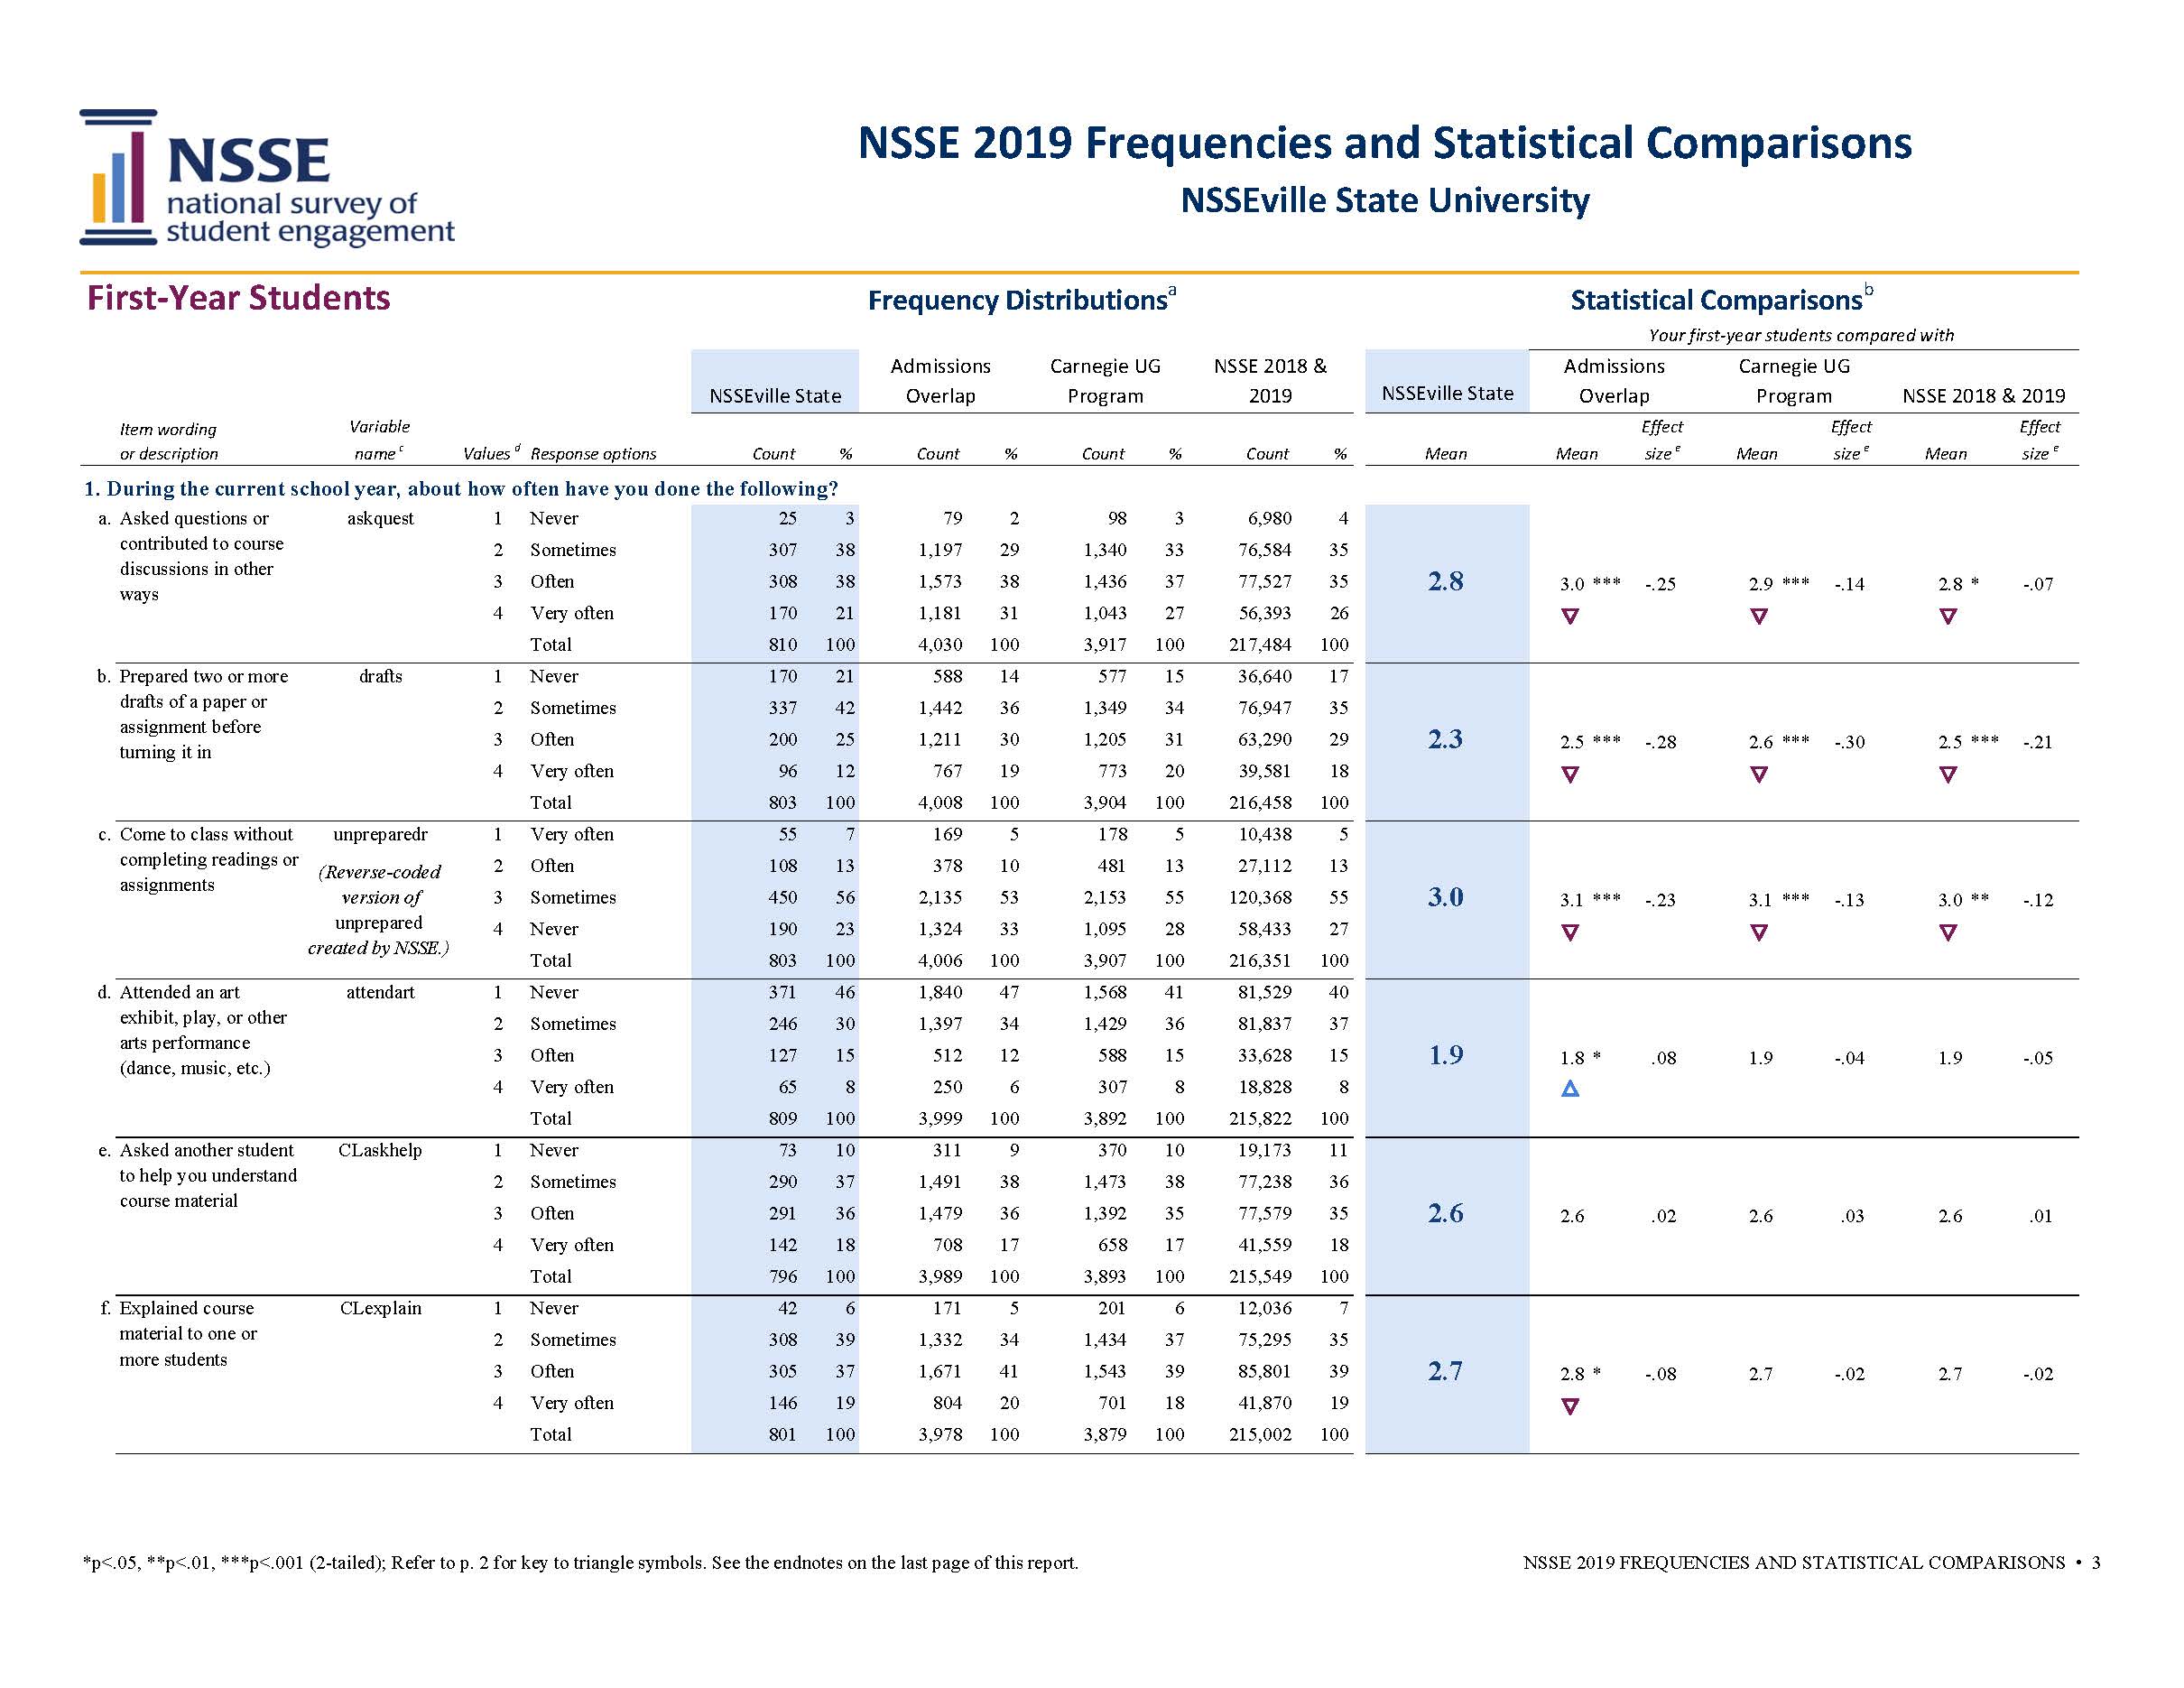 Sample Report: page 3 of NSSE Frequencies and Statistical Comparisons